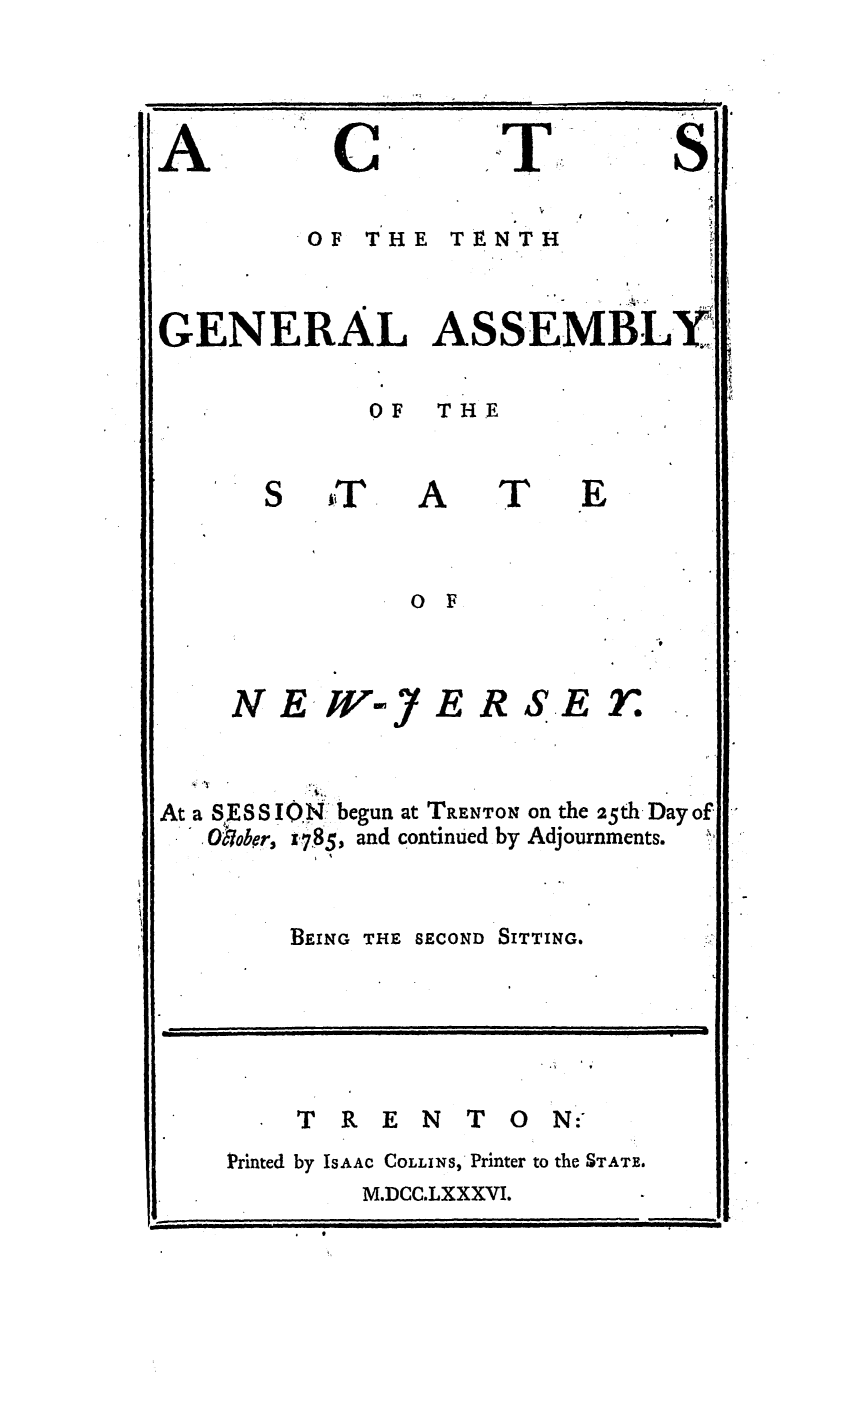 handle is hein.ssl/ssnj0243 and id is 1 raw text is: A

C

S.

OF THE TENTH
GENERAL ASSEMBLY
OF  THE

A

T

E

0 F

N E WK

E

RSET.

At. a S, ESSION'begun at TRENT~o on the 25th, Day of.
SOober, t7.85, and continued by Adjournments.
BEING THE SECOND SITTING.

 TRENTON:
Printed by IsAAc COLLINS, Printer to the STATE.
M.DCC.LXXXVI.

I      Jilaii i-

i .  -         -  11.I , II I I  |J Iill

T


